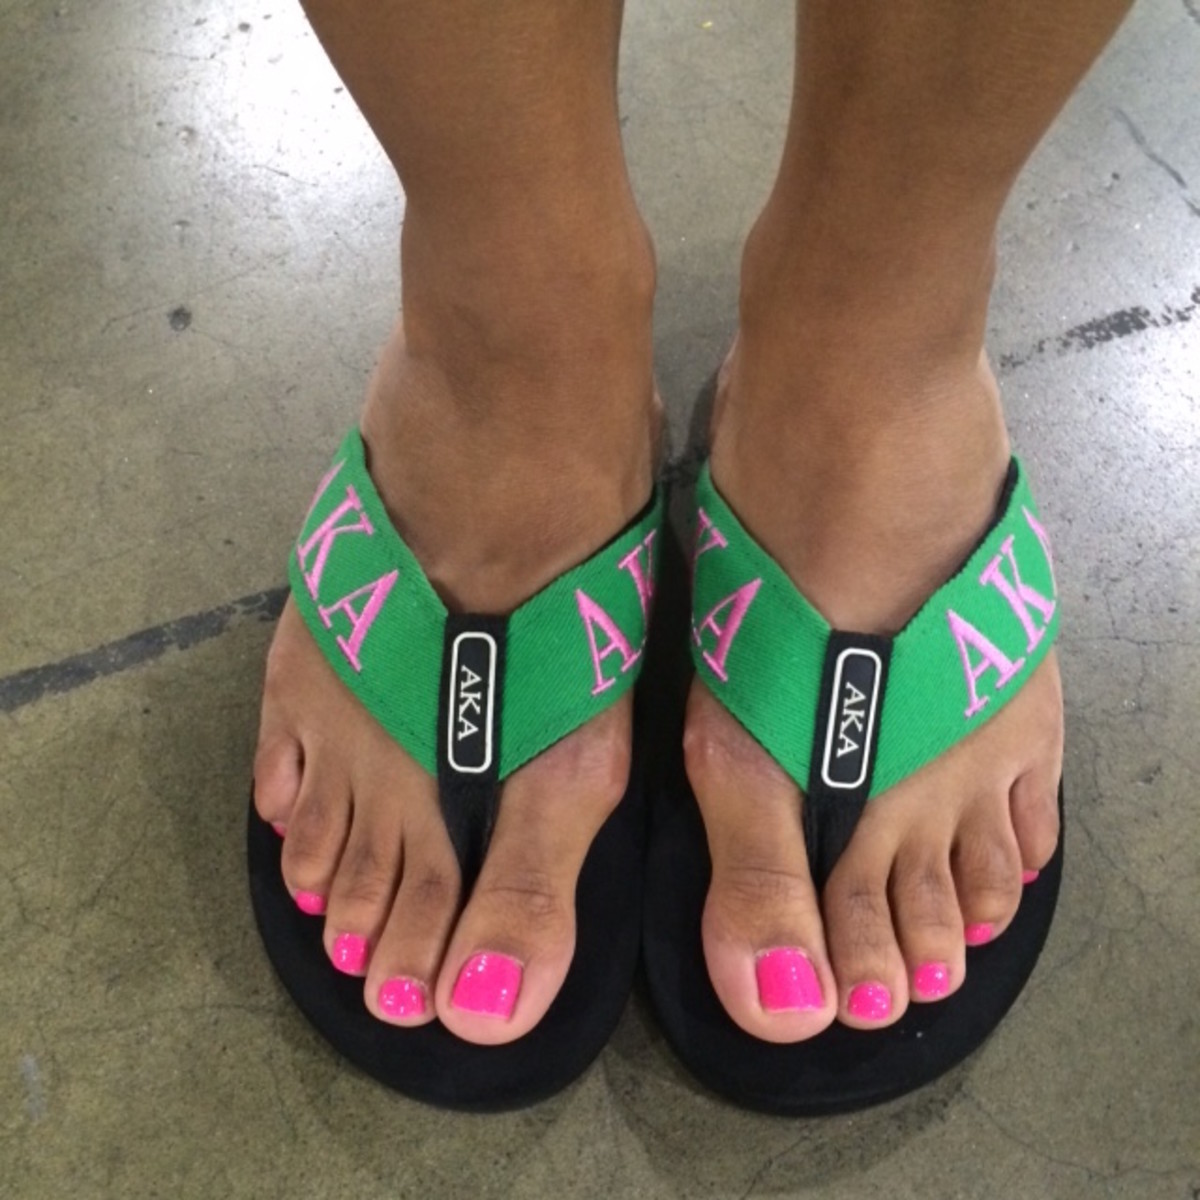 Customized Alpha Kappa Alpha Sorority, Inc. flip flops and another great pedicure!